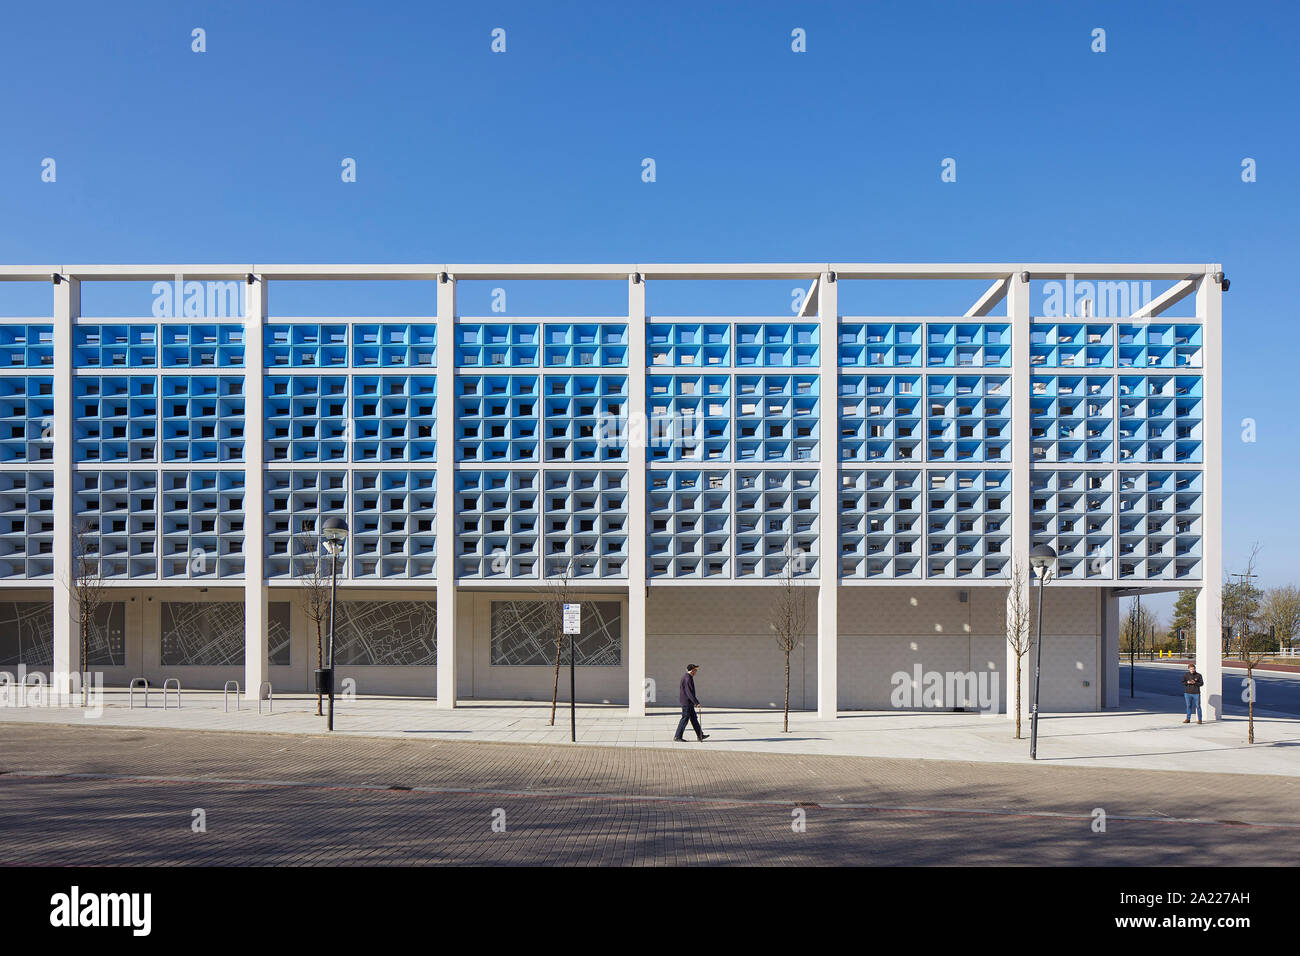 Front elevation with stone panels and perforated metal screens. Centre MK, Milton Keynes, United Kingdom. Architect: Leslie Jones Architecture, 2019. Stock Photo